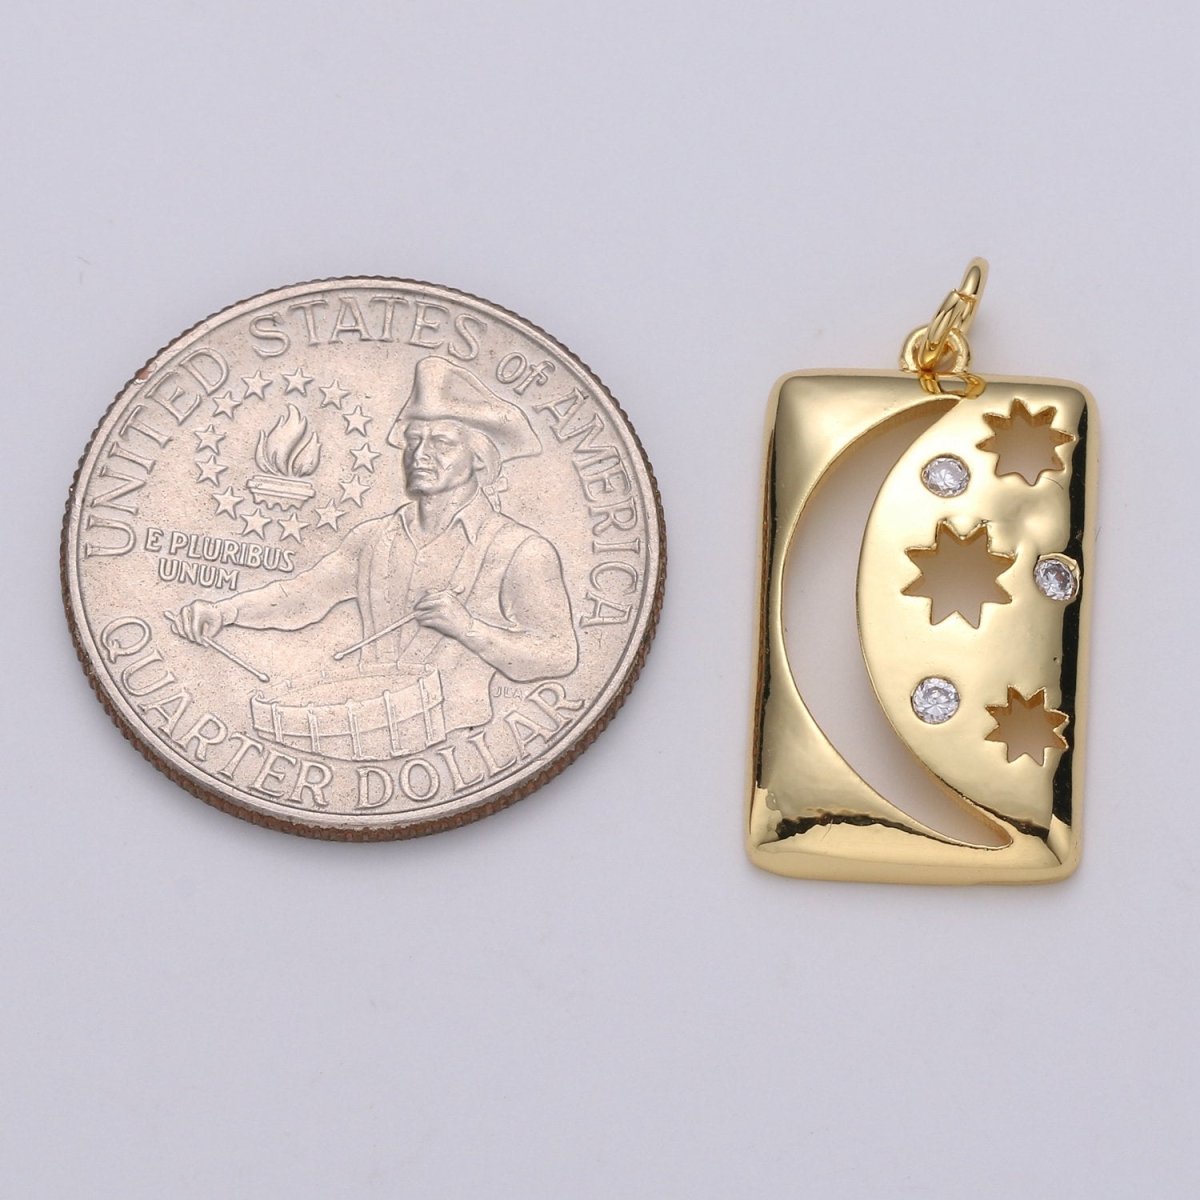 Celestial Jewelry Gold Crescent Moon Charm Star Tag Charm Jewelry Making Supply 24K Gold Filled Findings D-415 D-416 - DLUXCA